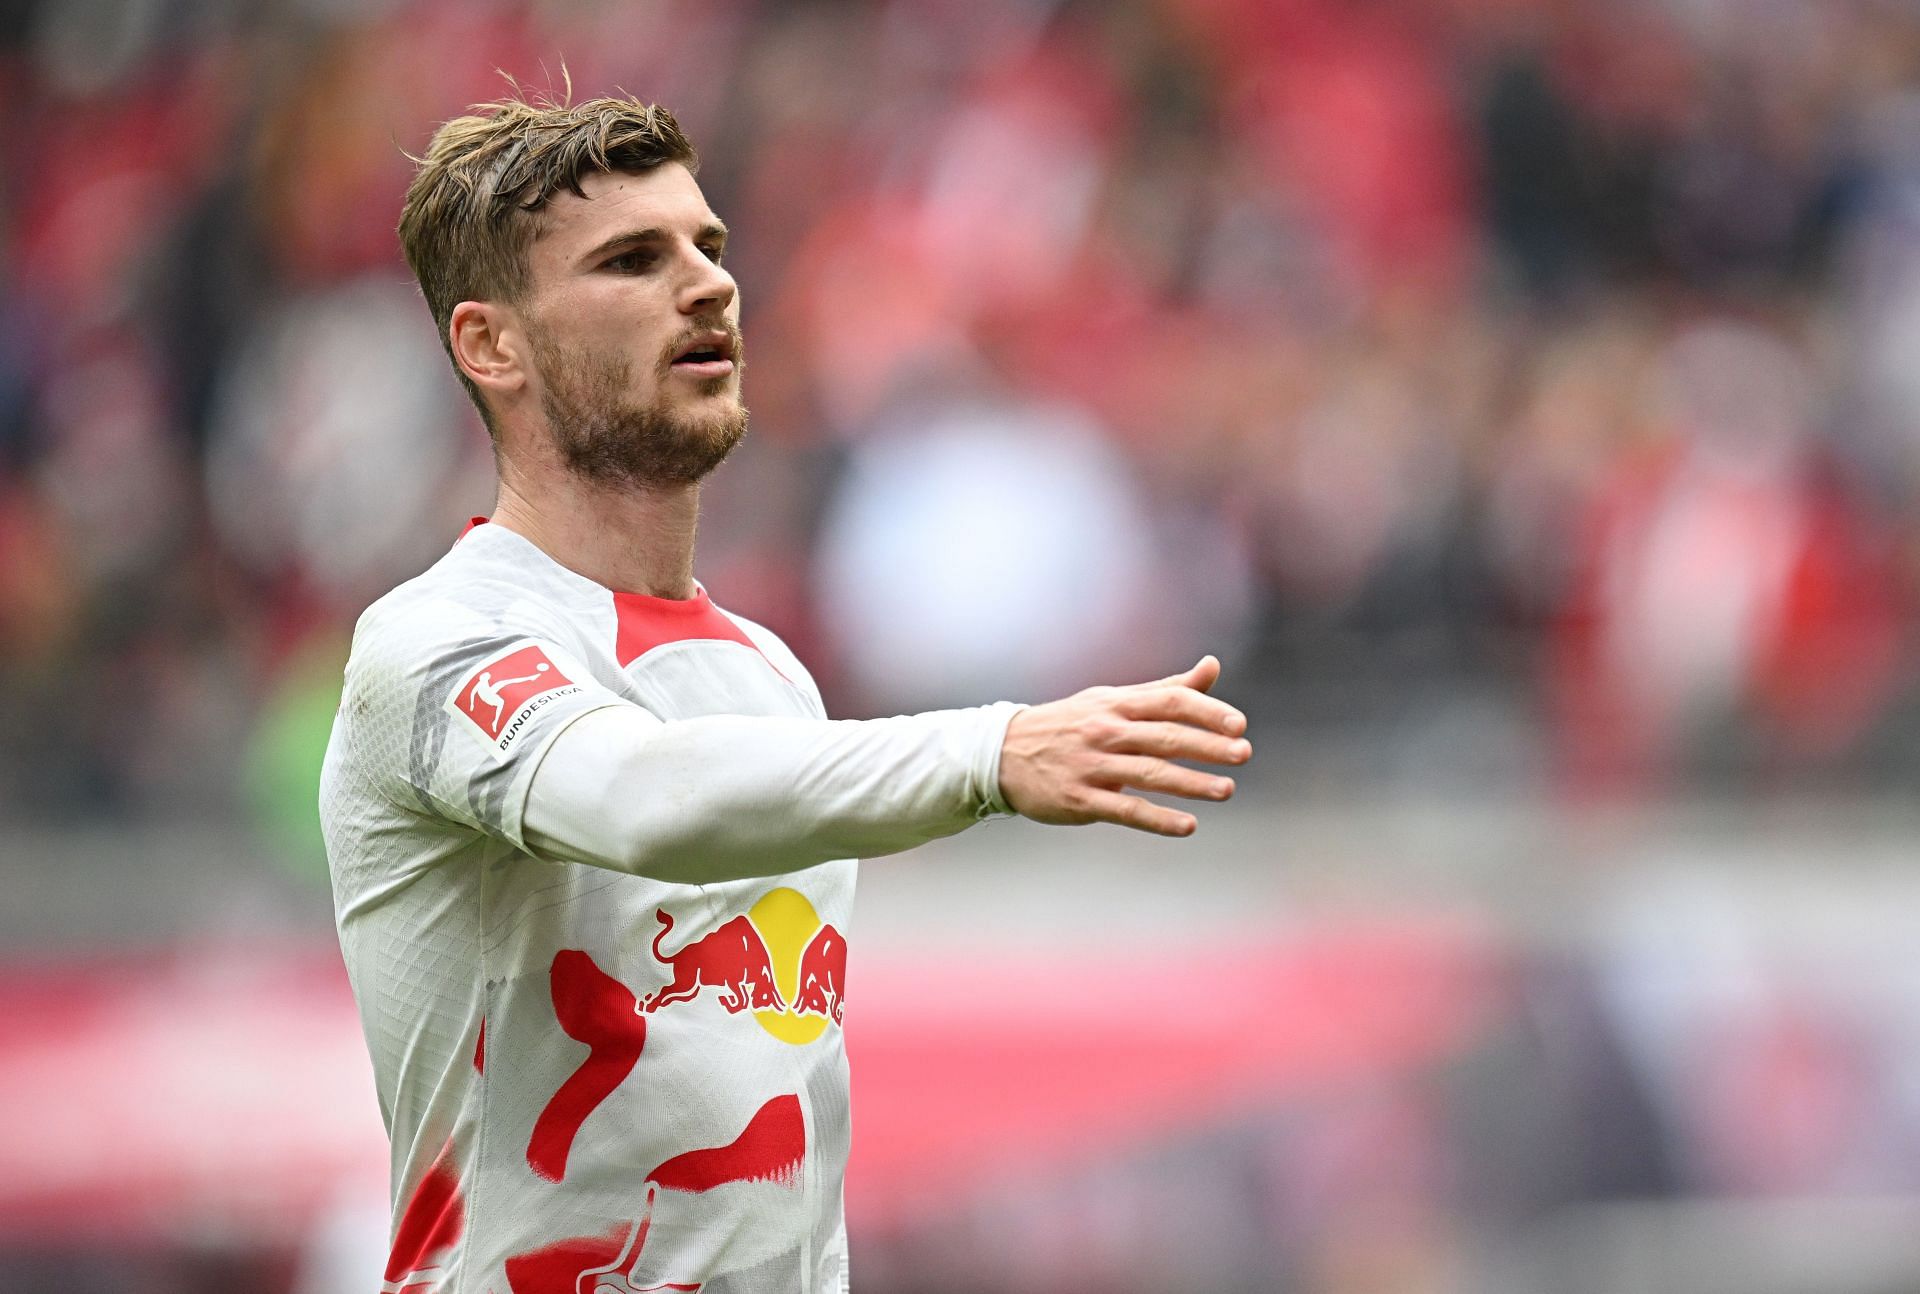 Timo Werner could make his debut against the Red Devils.